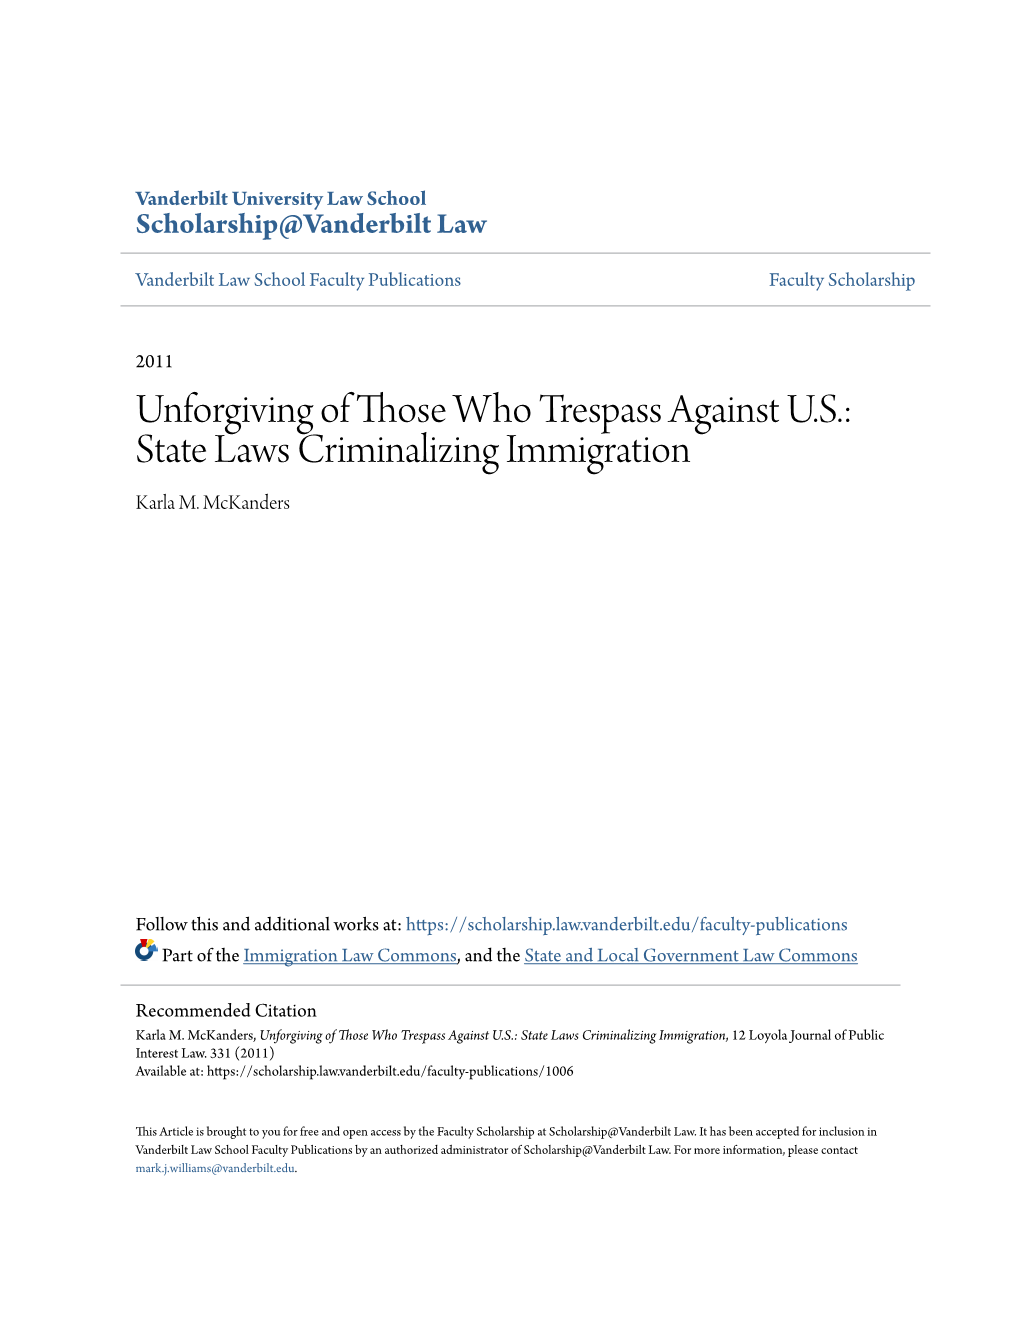 Unforgiving of Those Who Trespass Against U.S.: State Laws Criminalizing Immigration Karla M